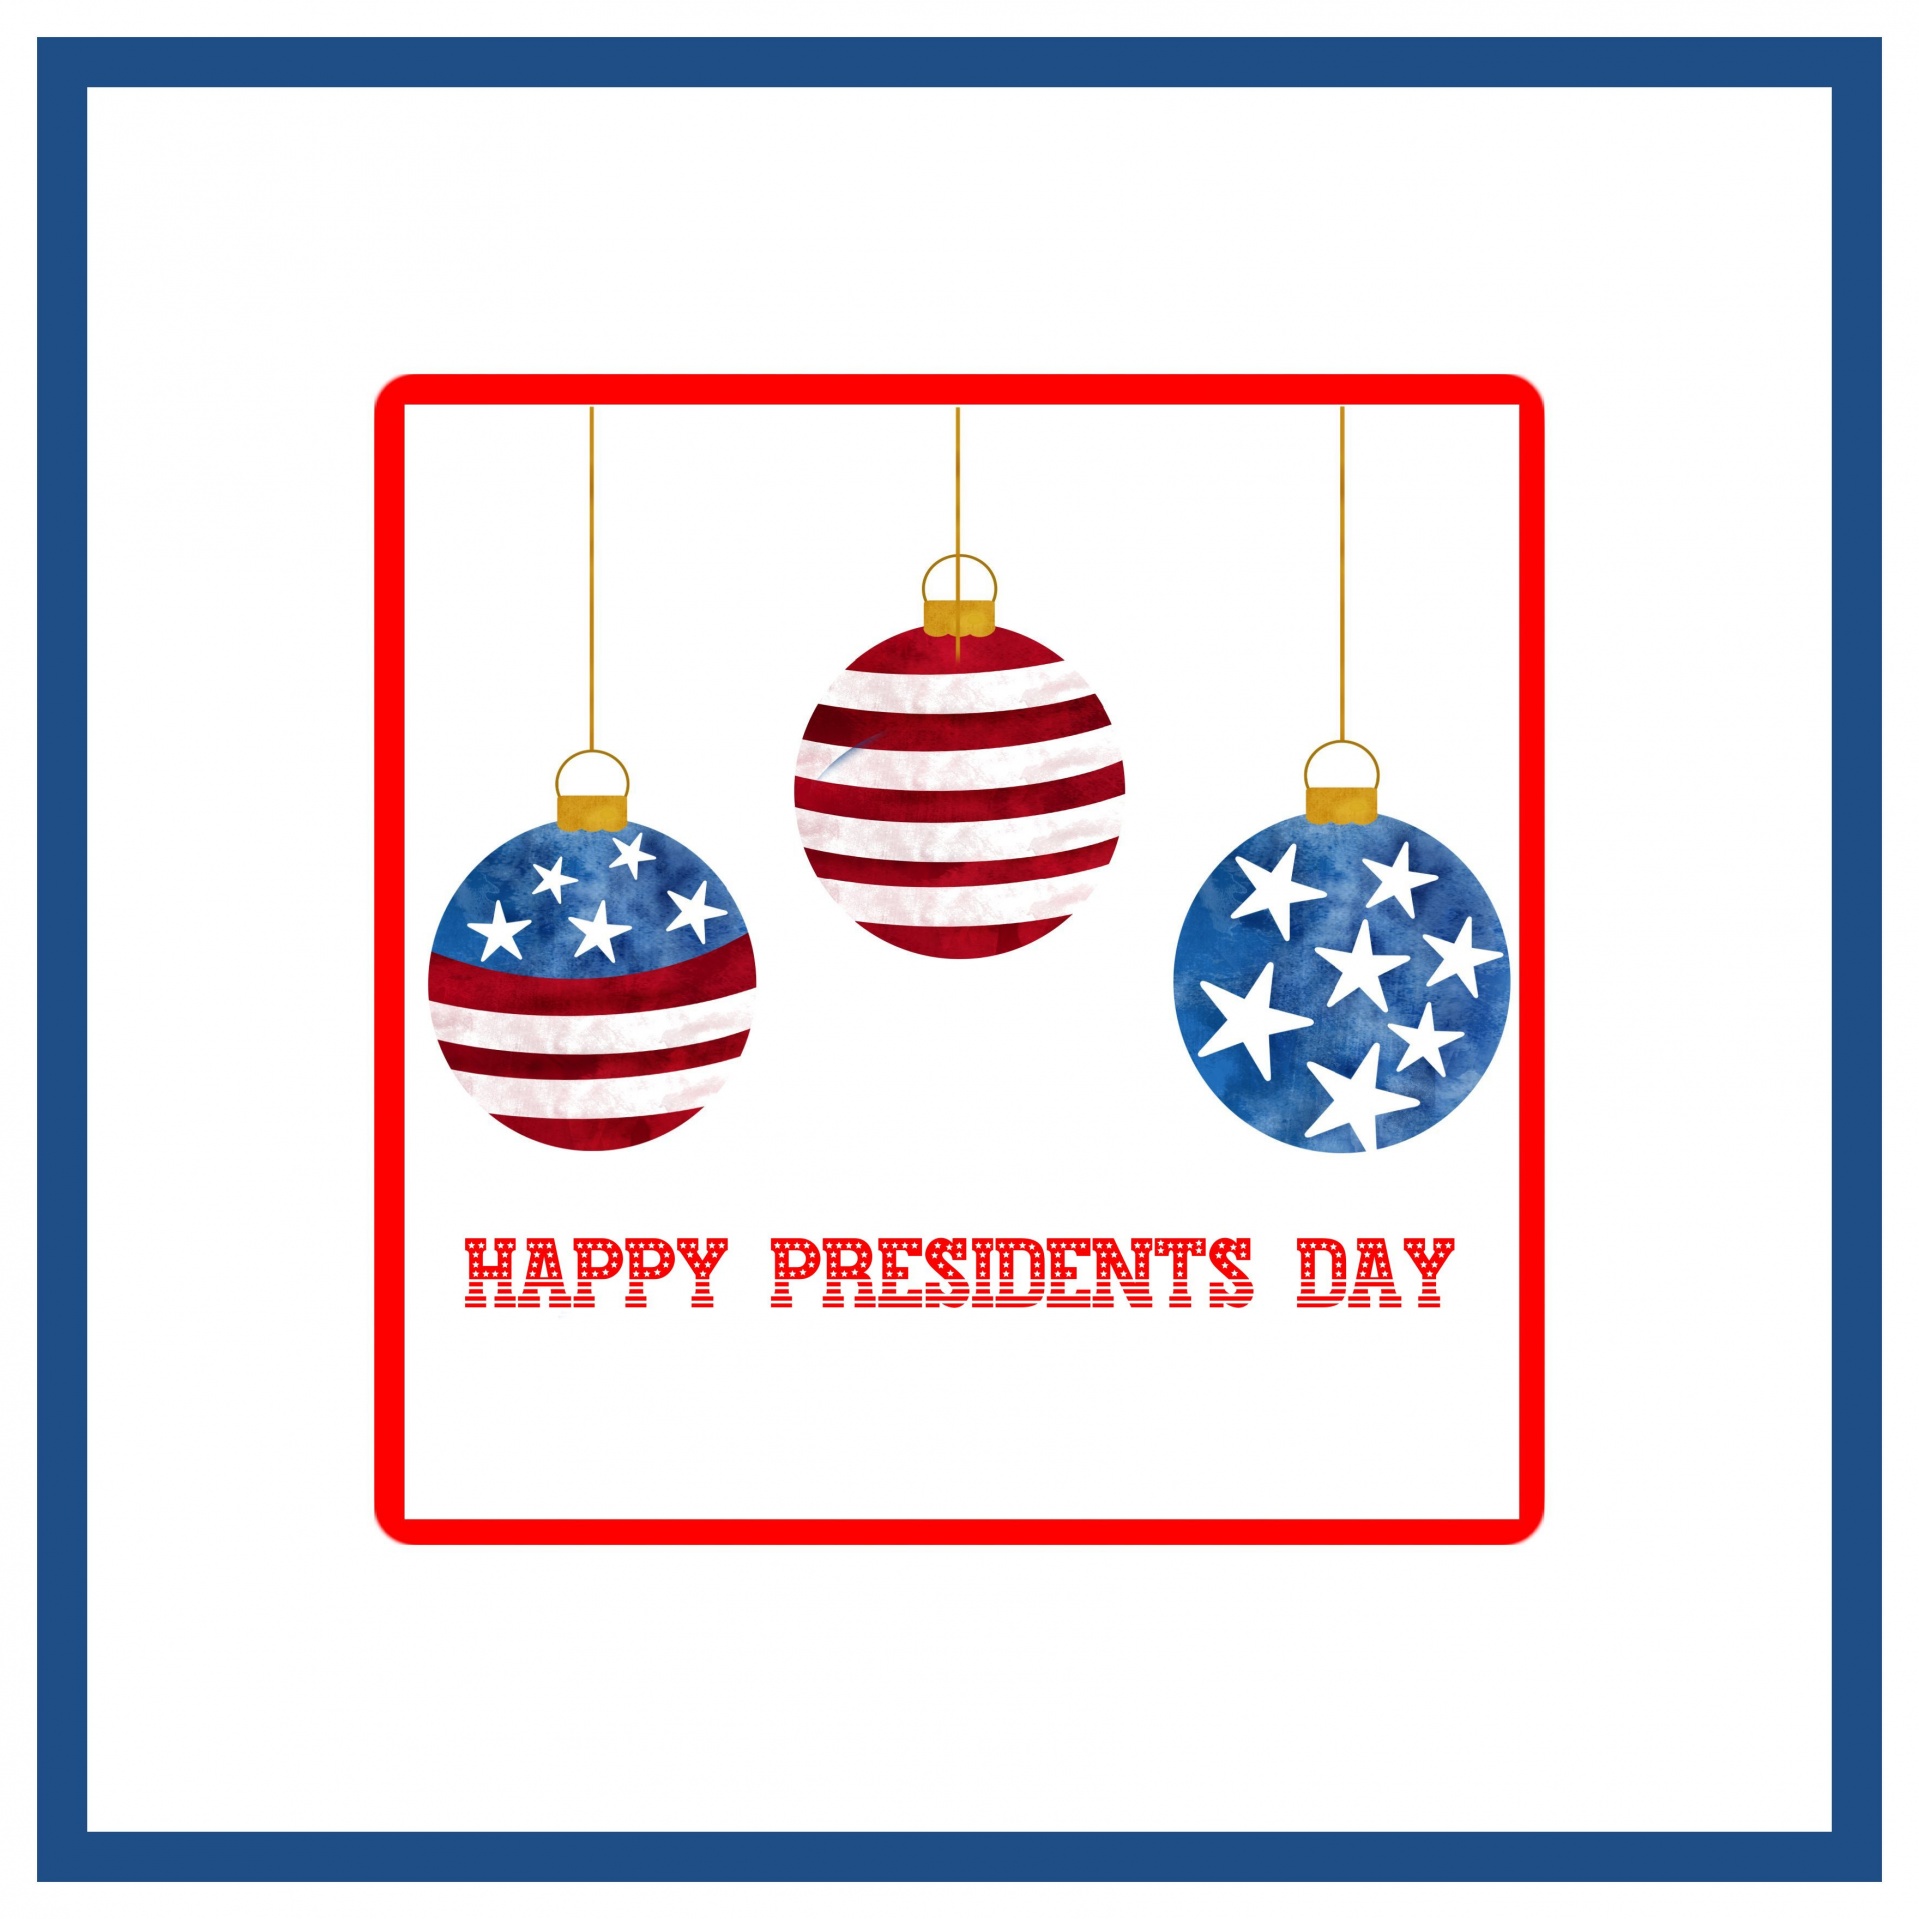 presidents-day-poster-free-stock-photo-public-domain-pictures